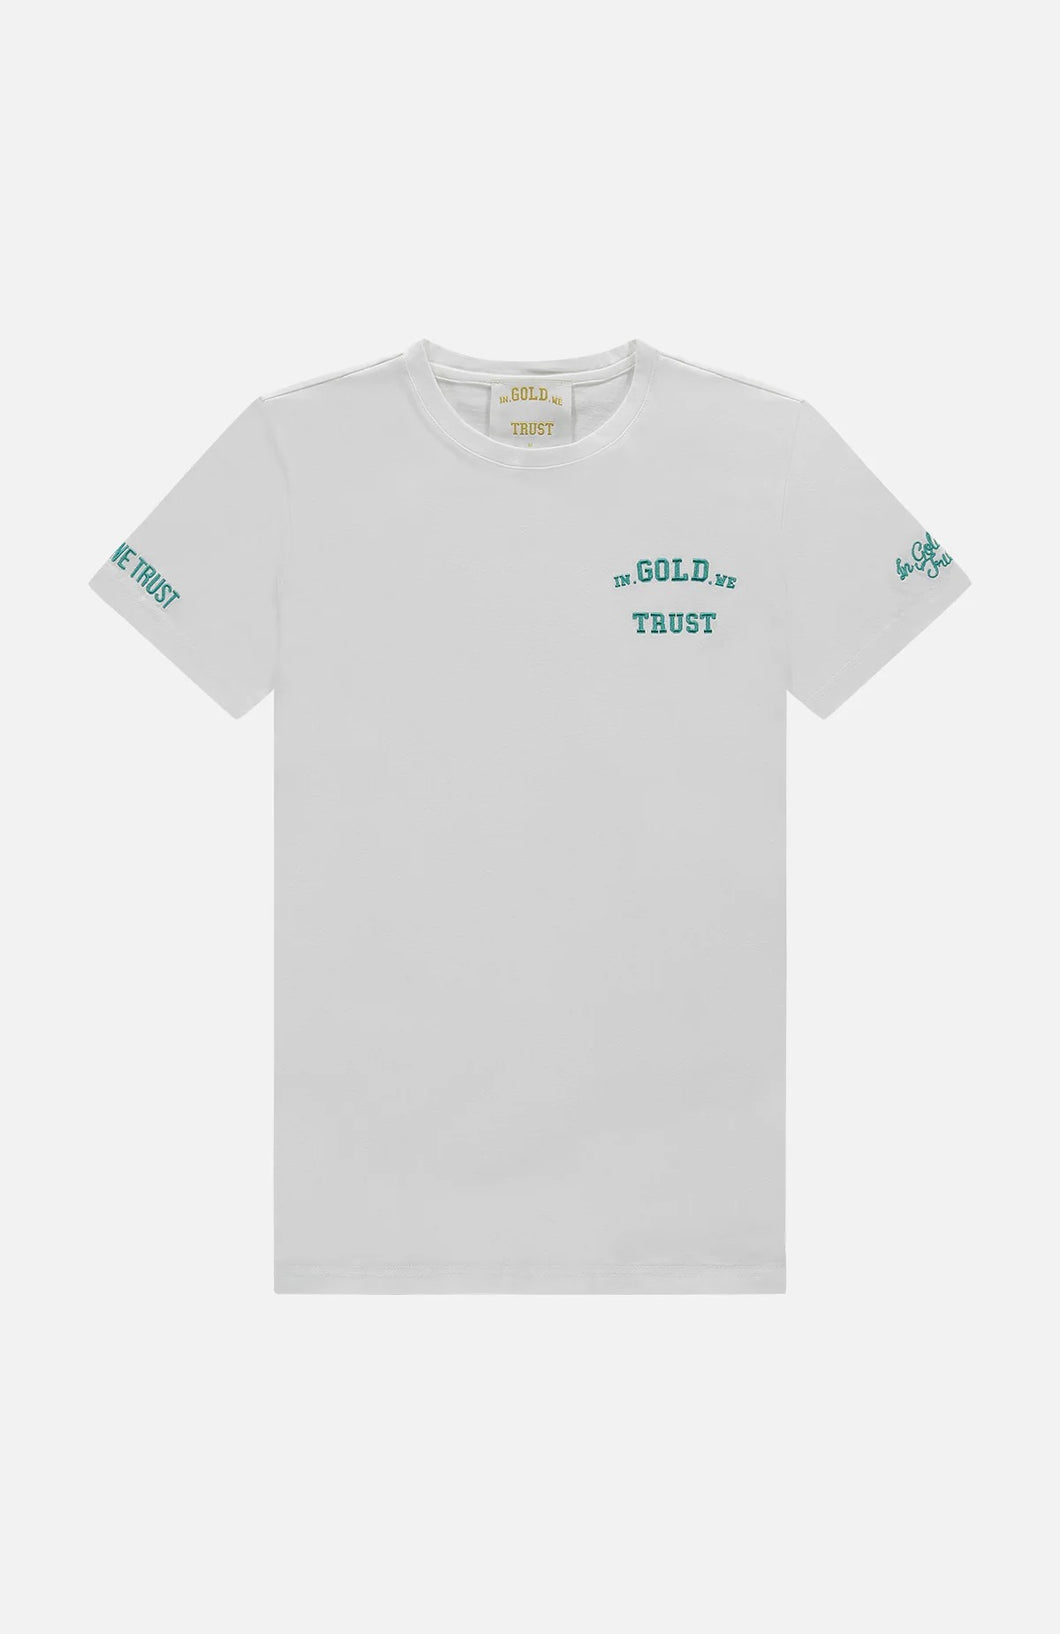 In GOLD We Trust T-shirt